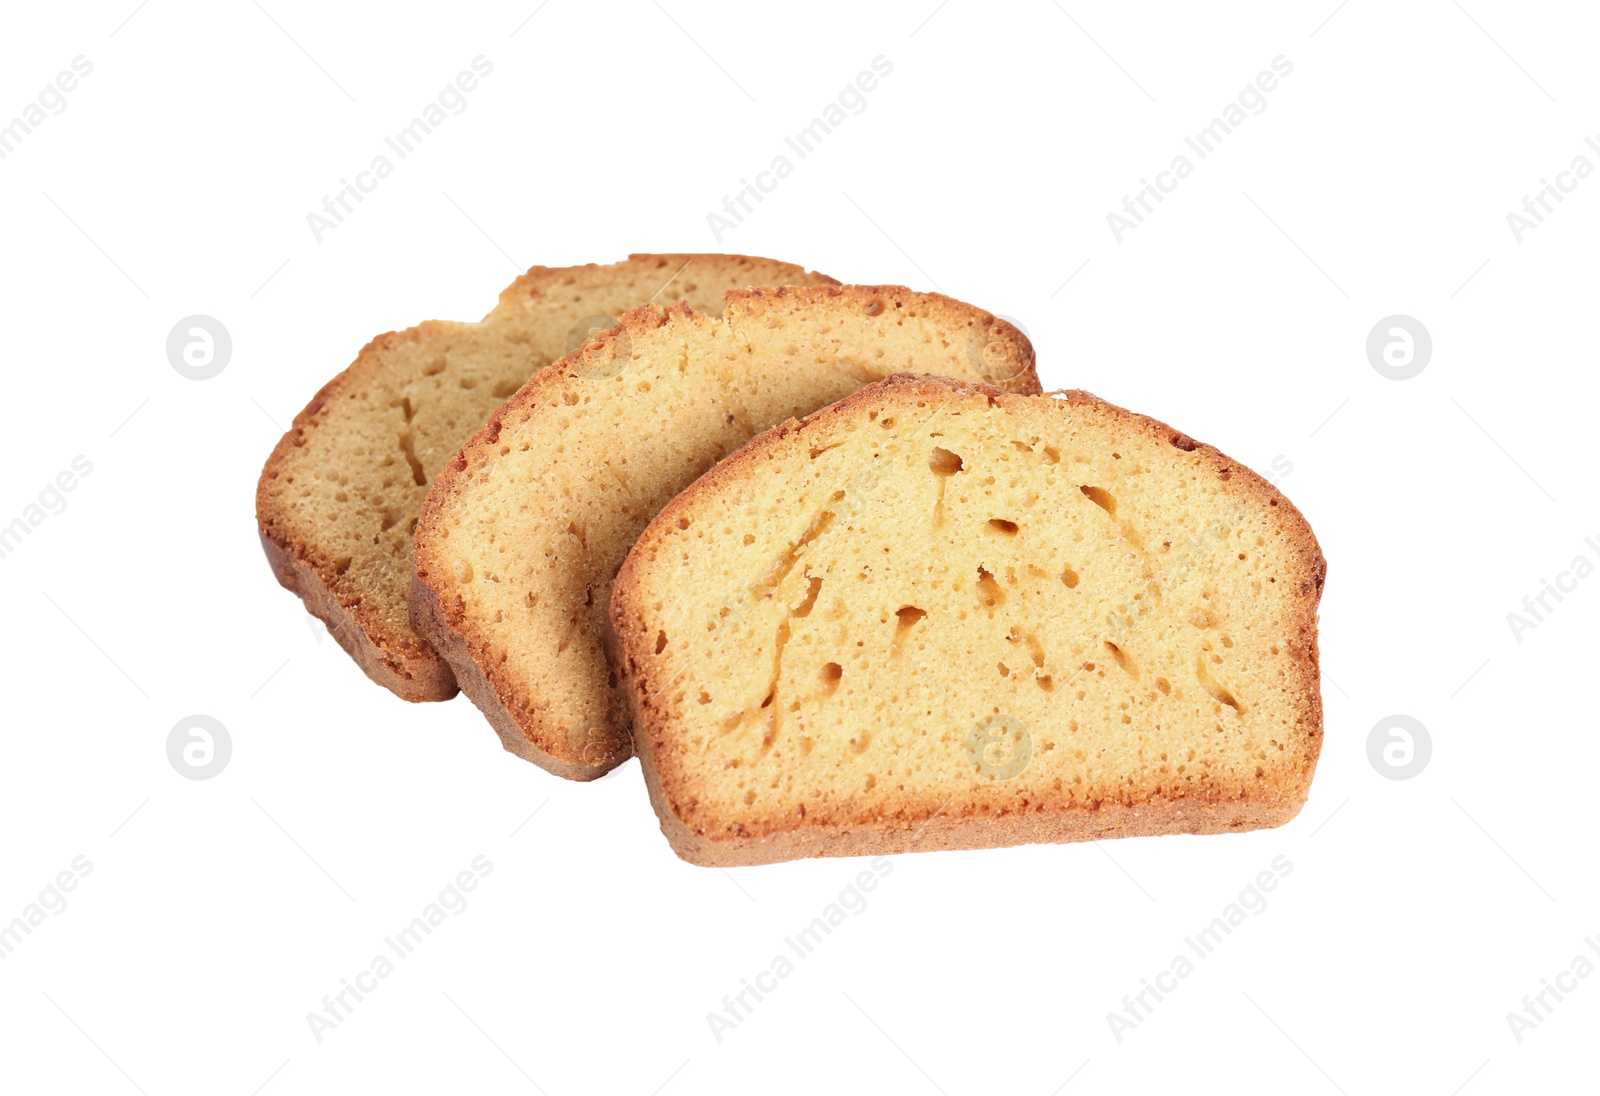 Photo of Slices of fresh gingerbread cake on white background